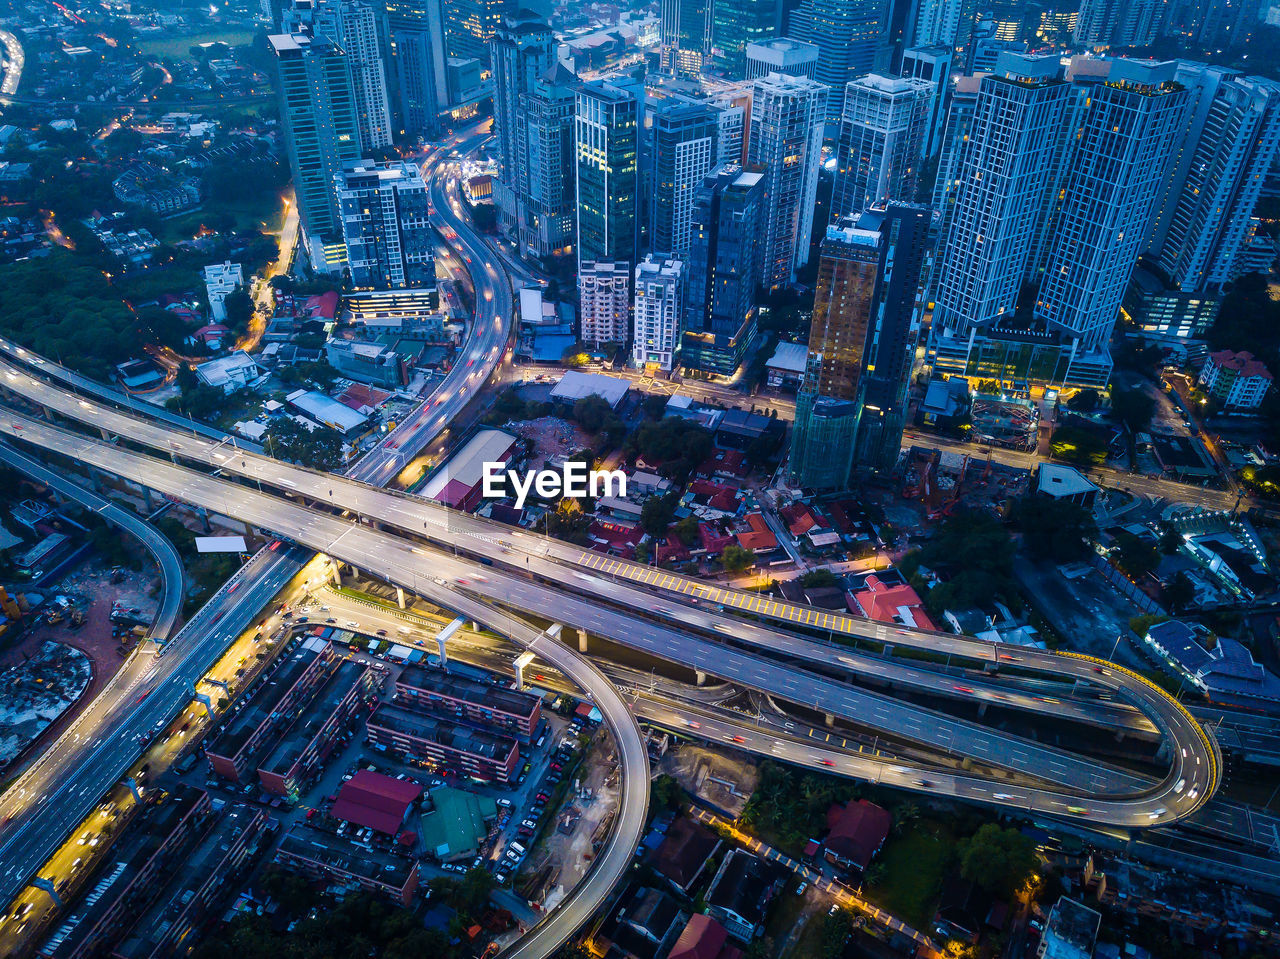 Aerial view of illuminated highway amidst buildings at night